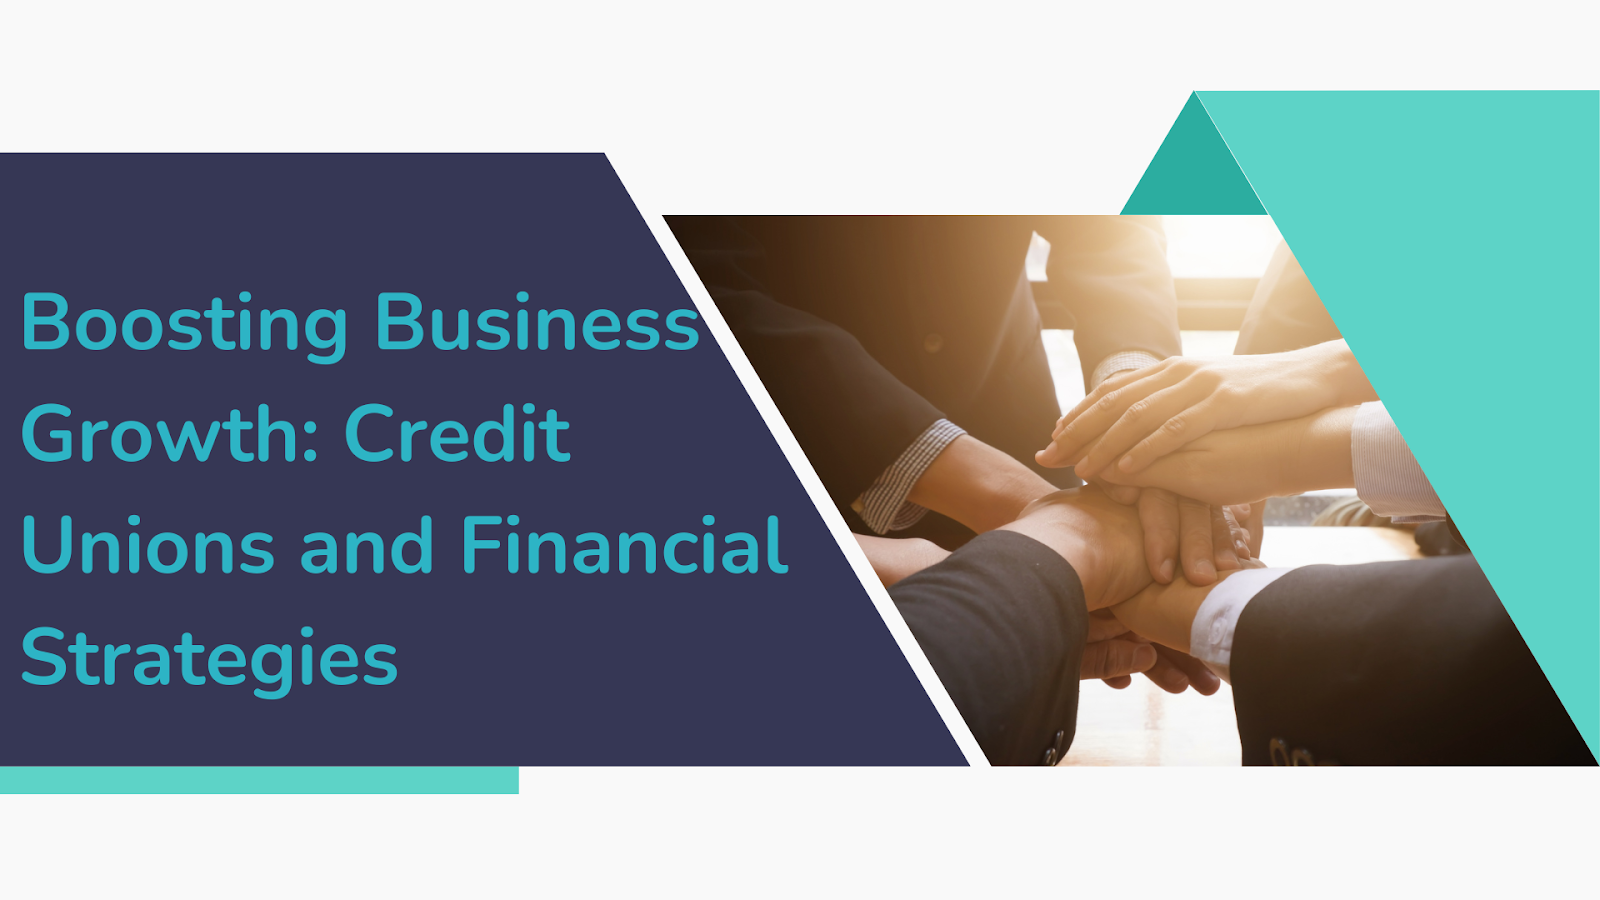 Boosting Business Growth: Credit Unions and Financial Strategies